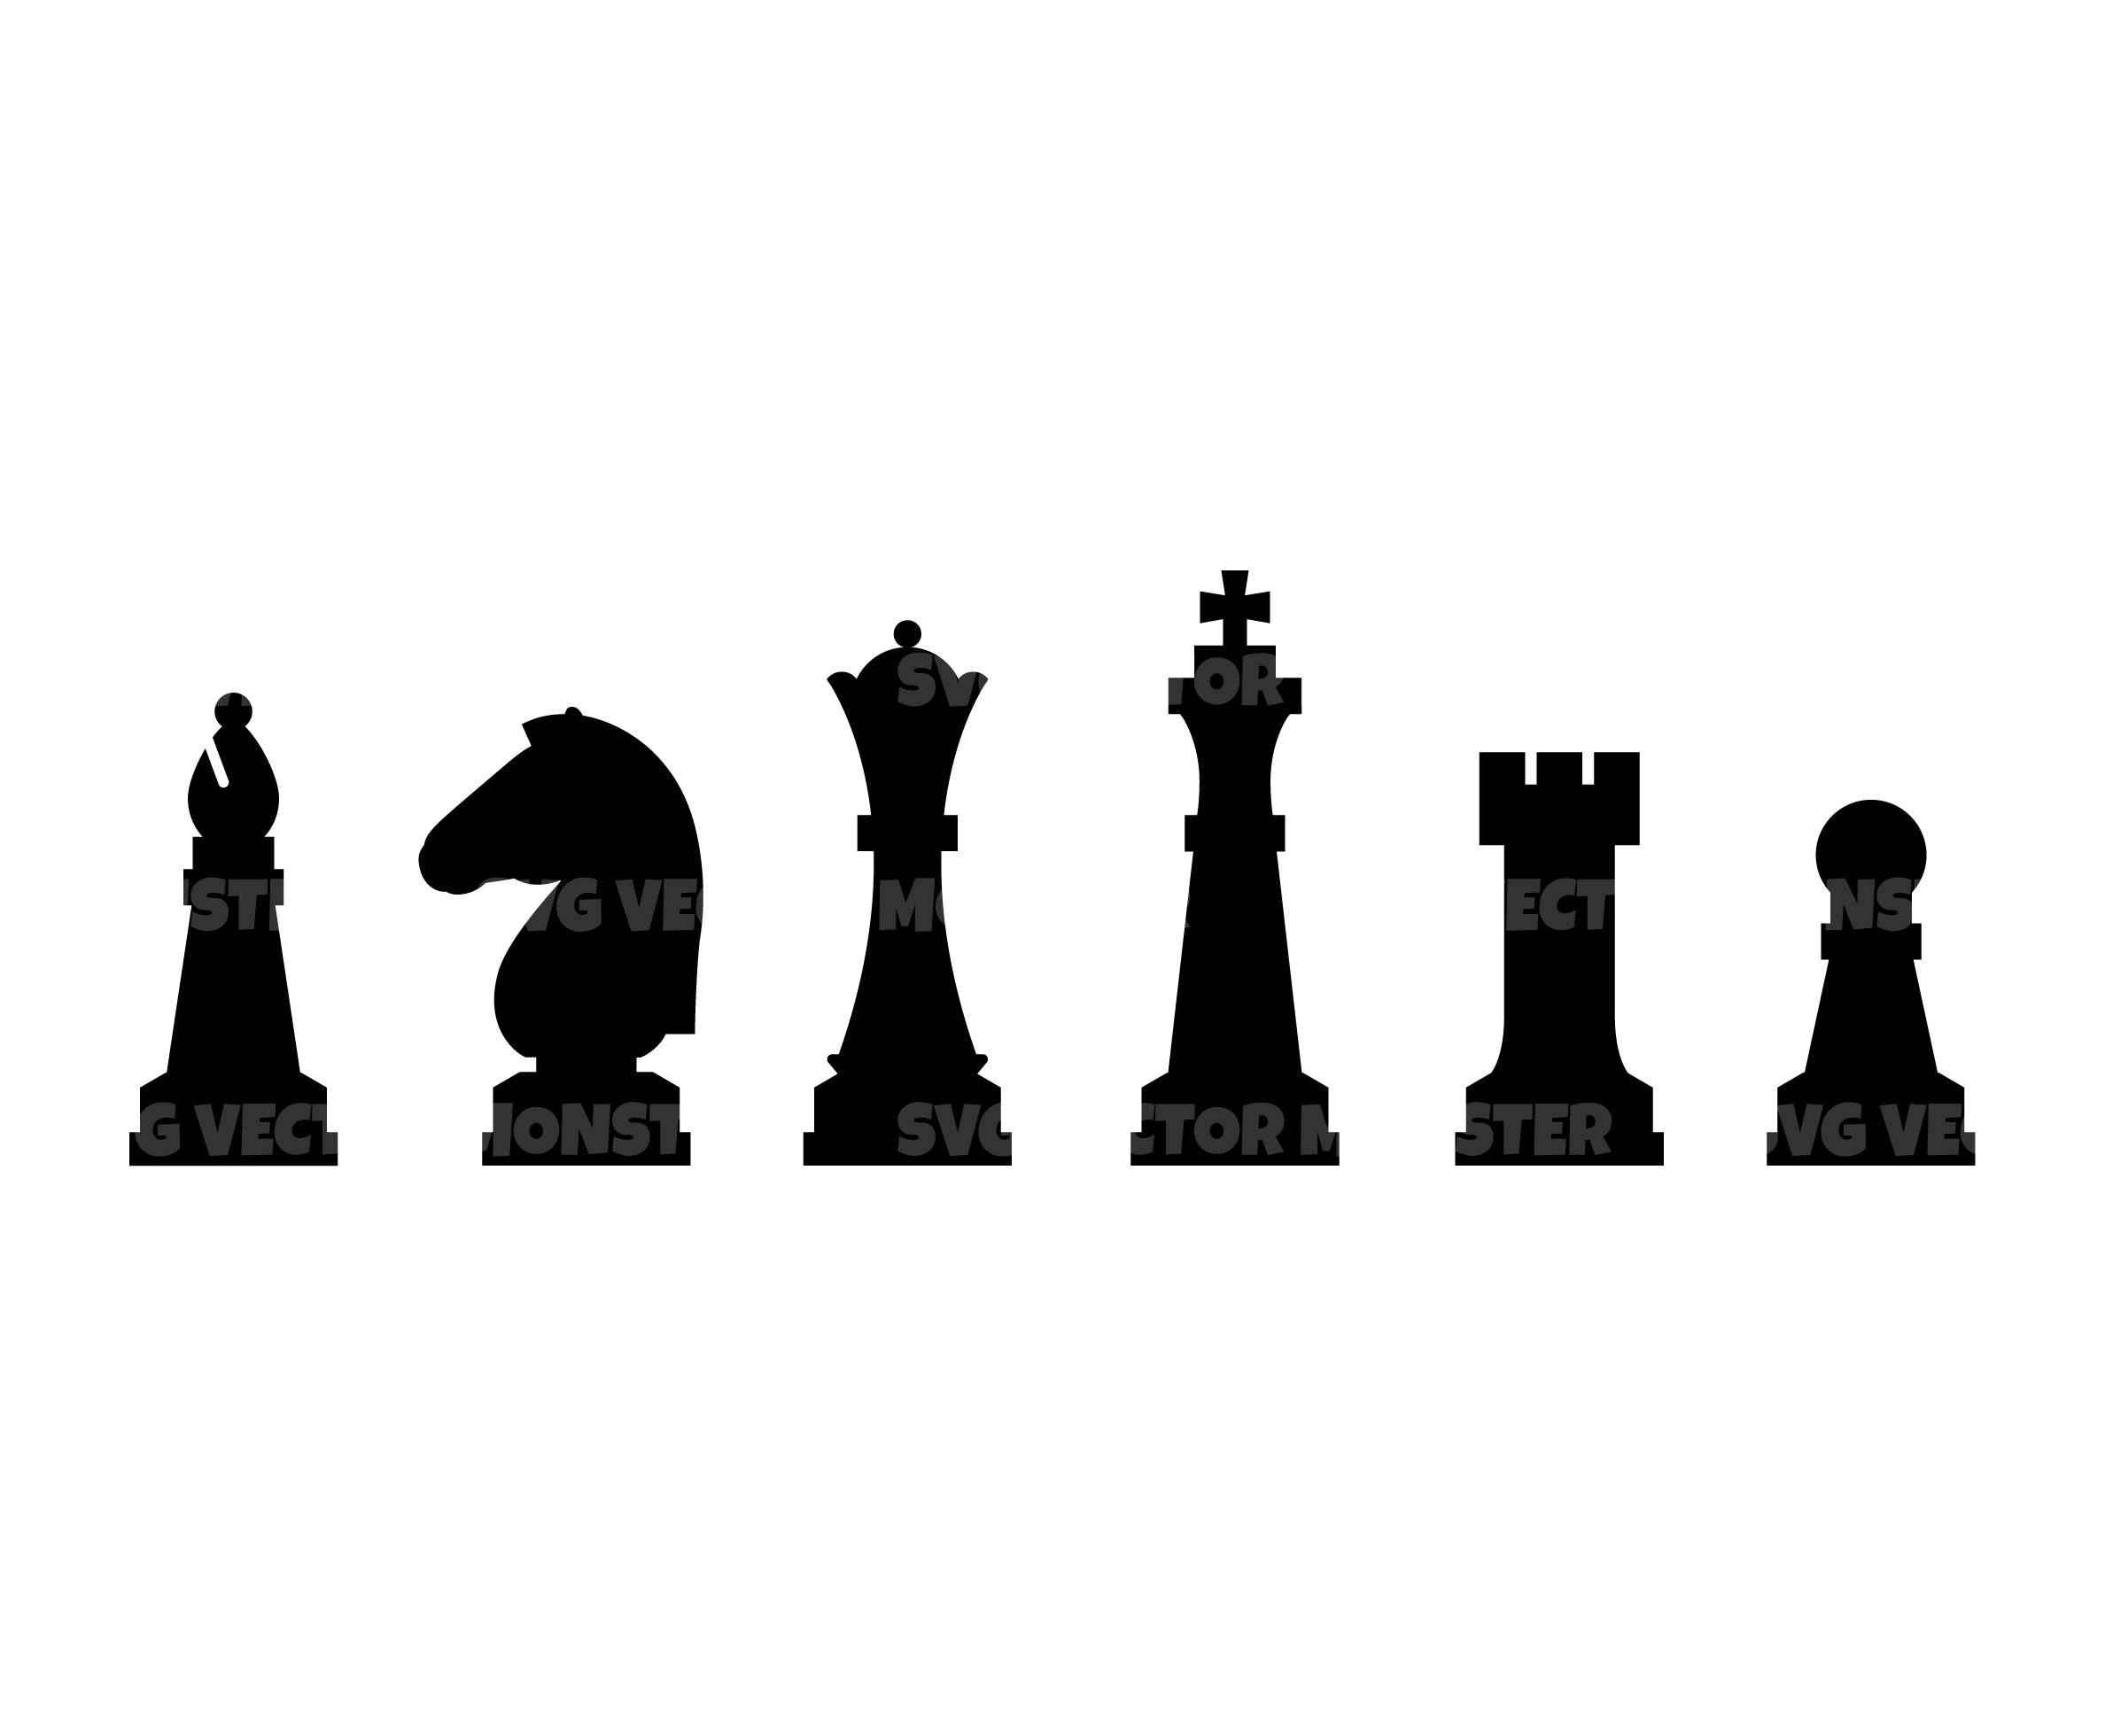 Chess Pieces SVG Clip Art Cut File Silhouette dxf eps png j - Inspire Uplift